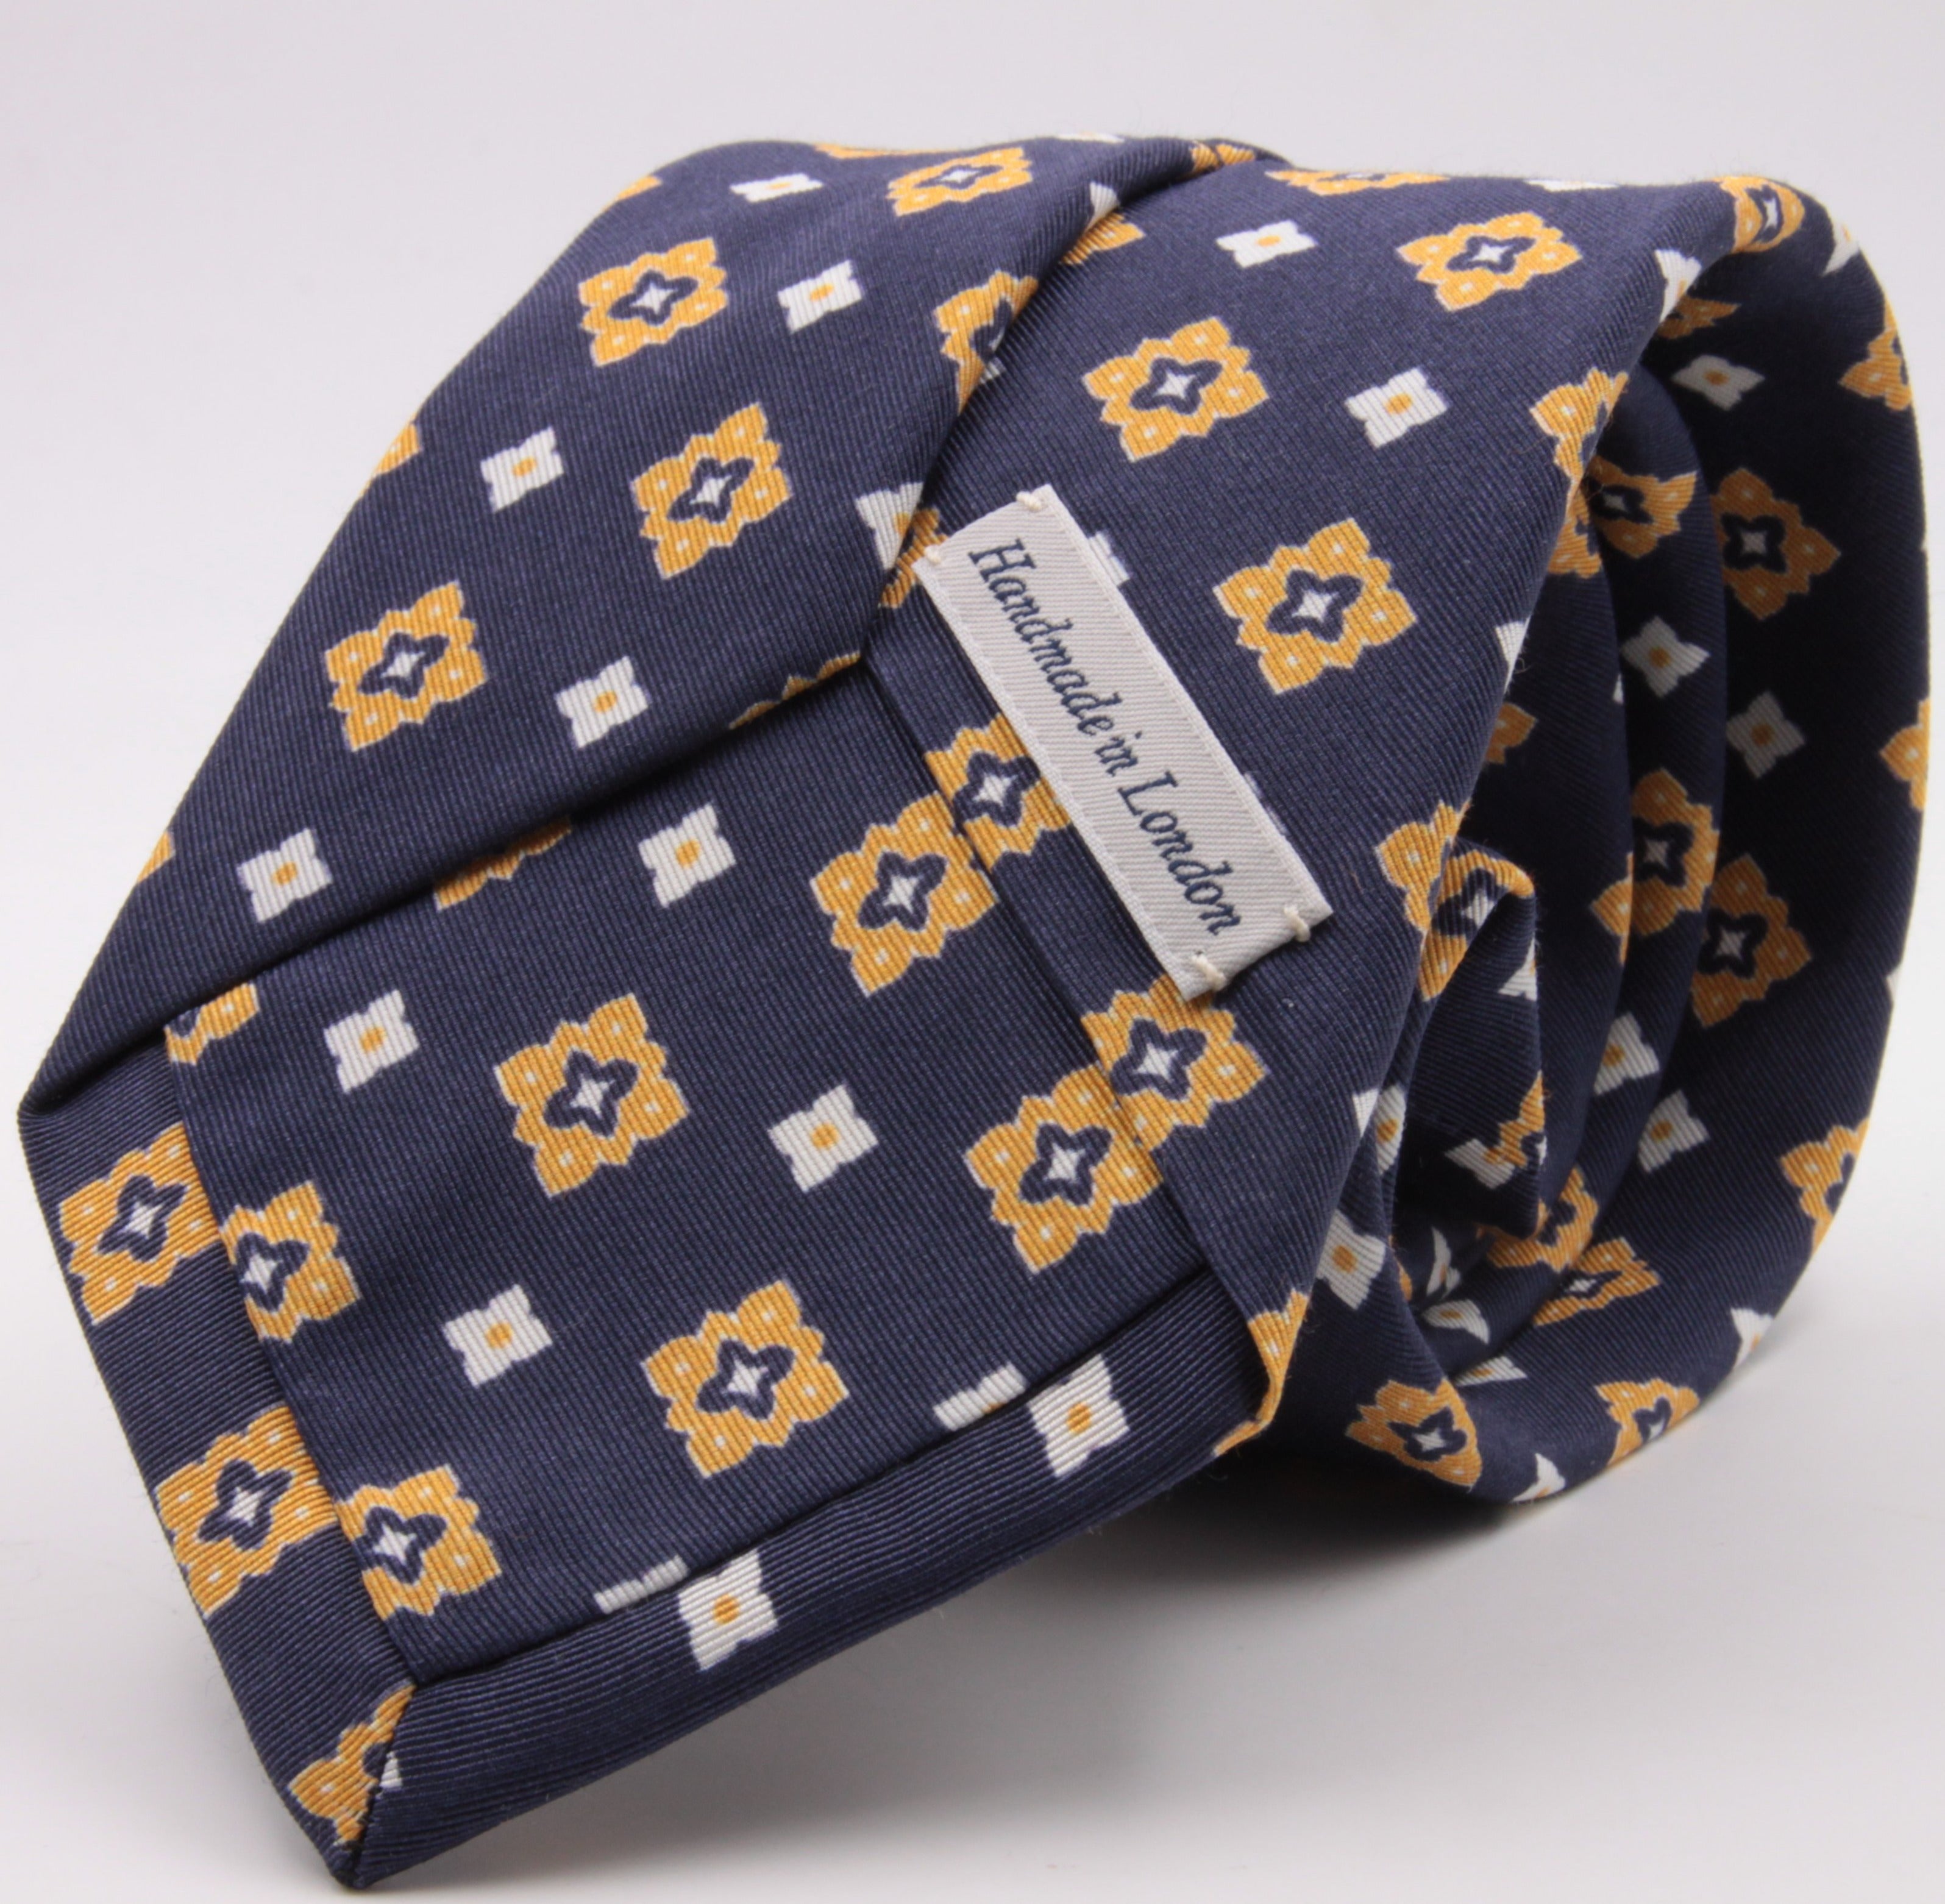 Drake's for Cruciani e Bella Printed 60% Silk 40% Cotton Self-Tipped Blue, Yellow and White Motif Tie  Handmade in London, England 8 cm x 149 cm #5430